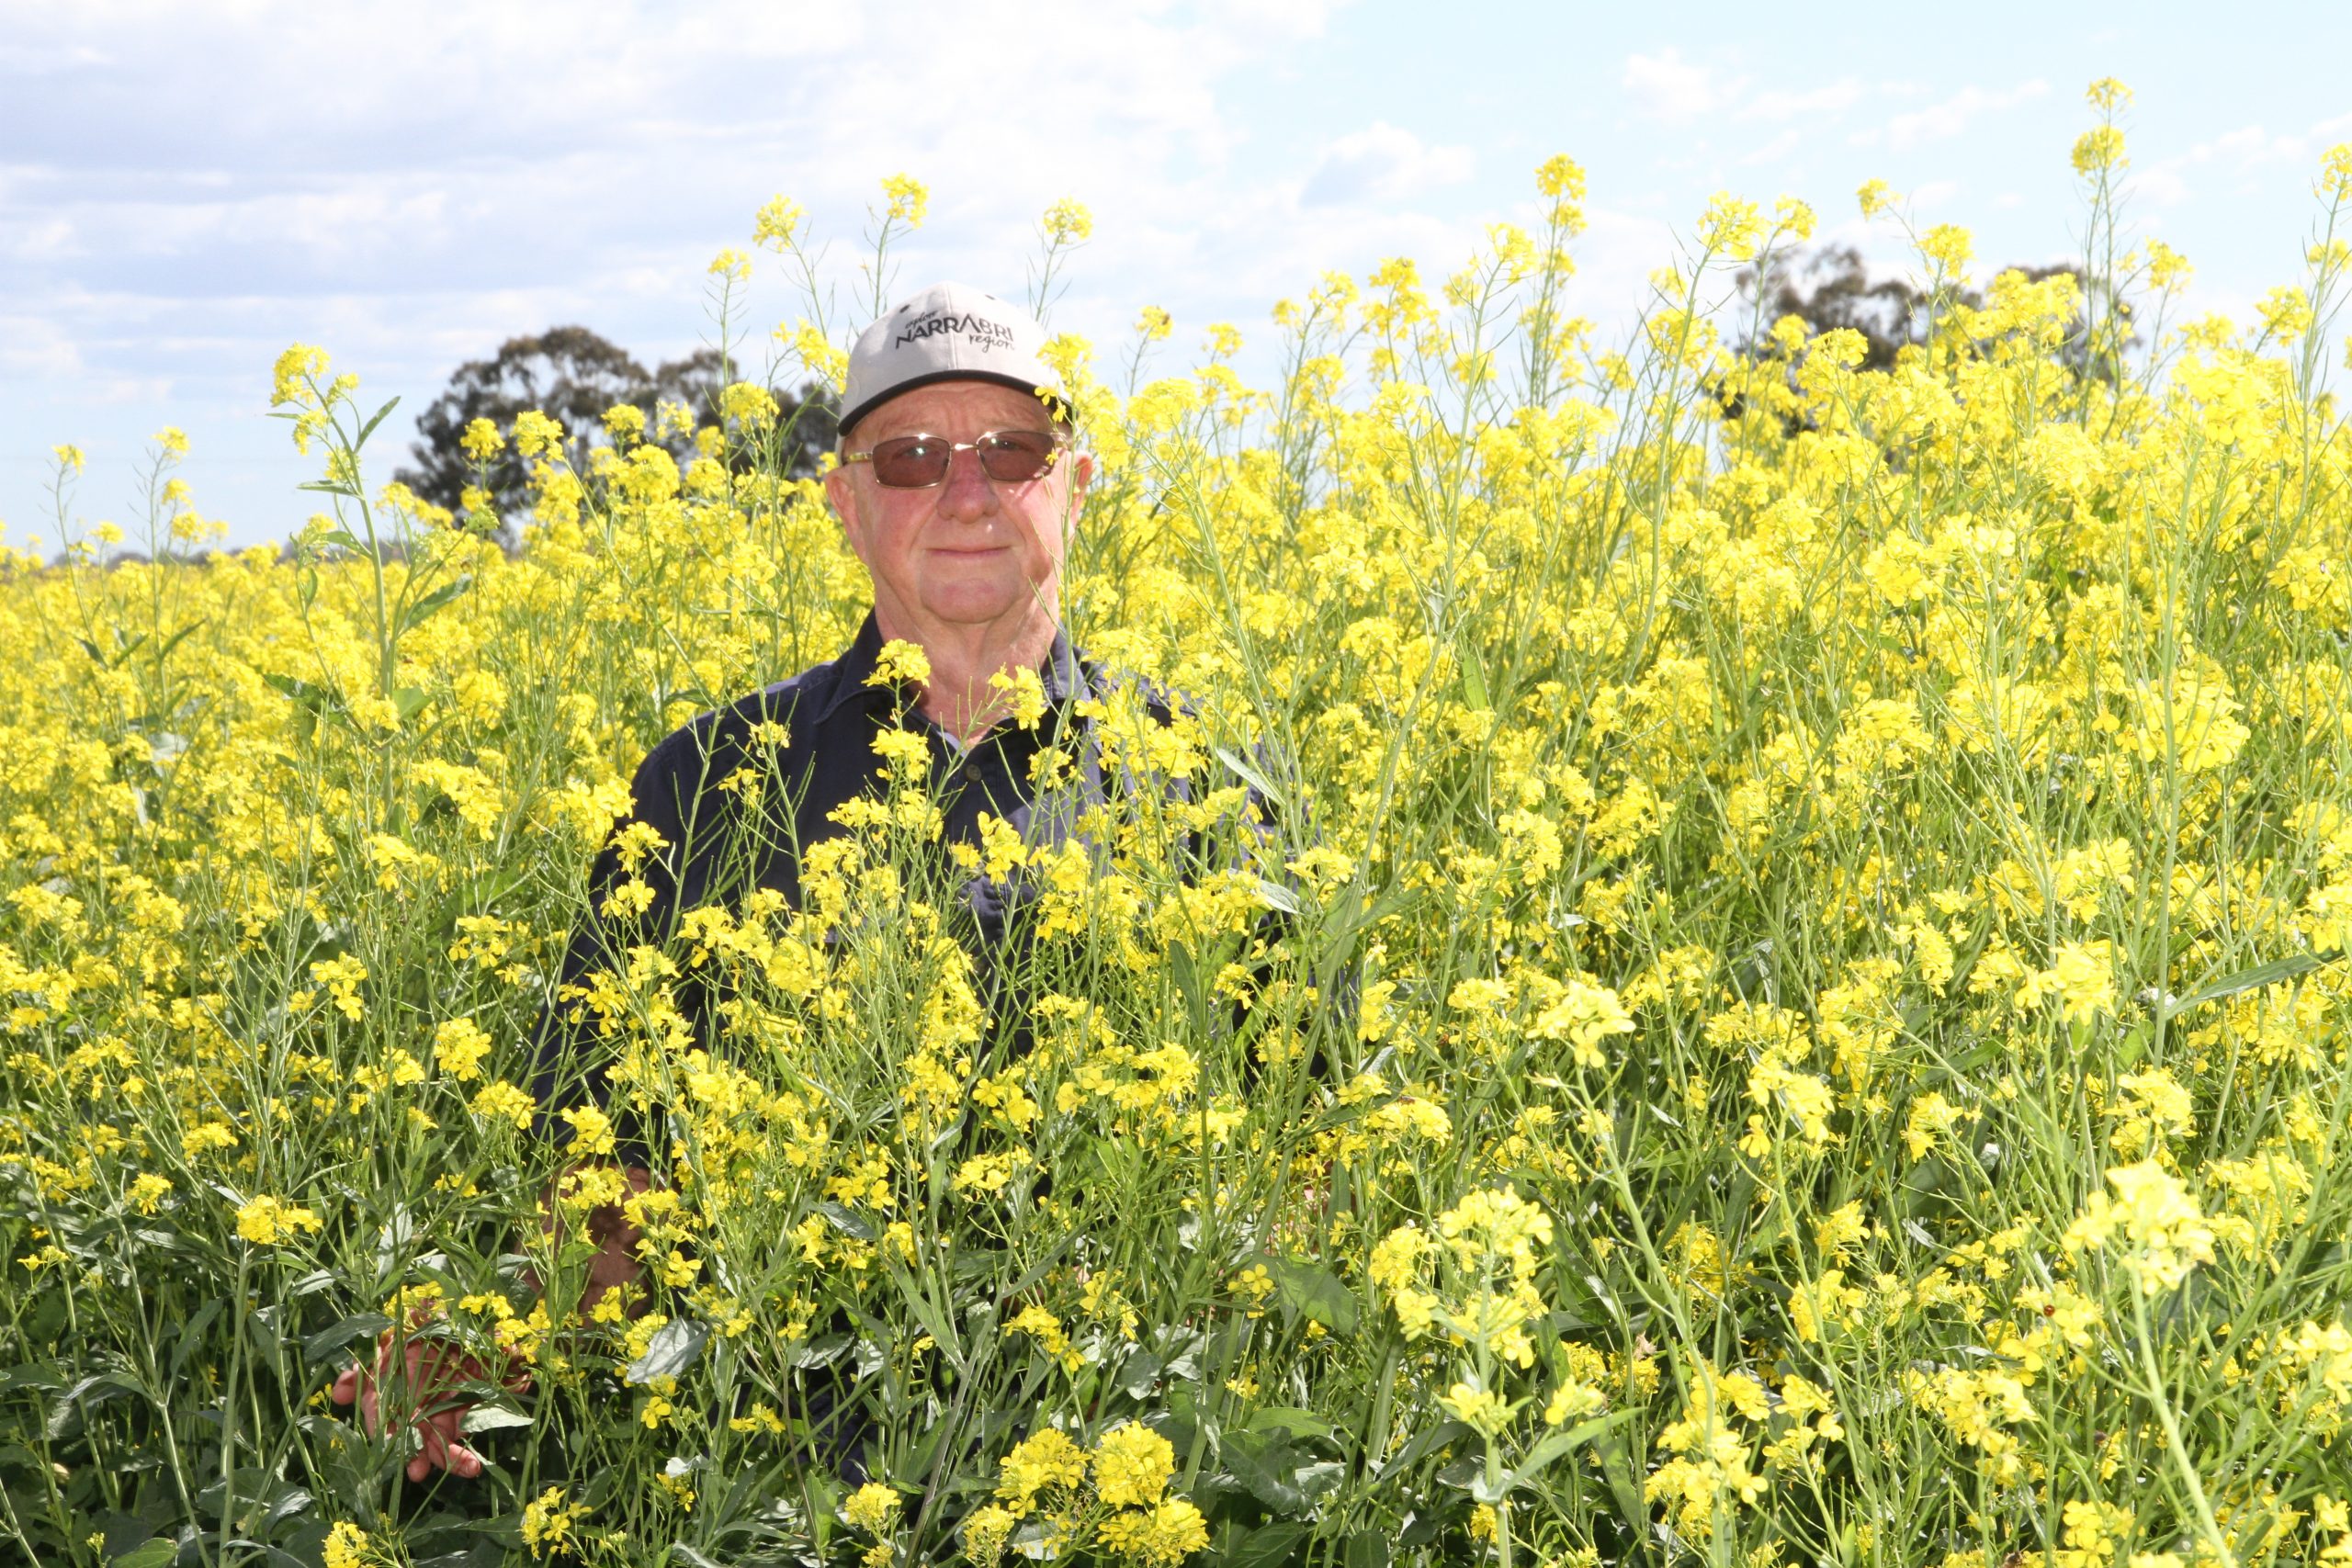 Multimillion-dollar mustard industry vision moves steadily to reality